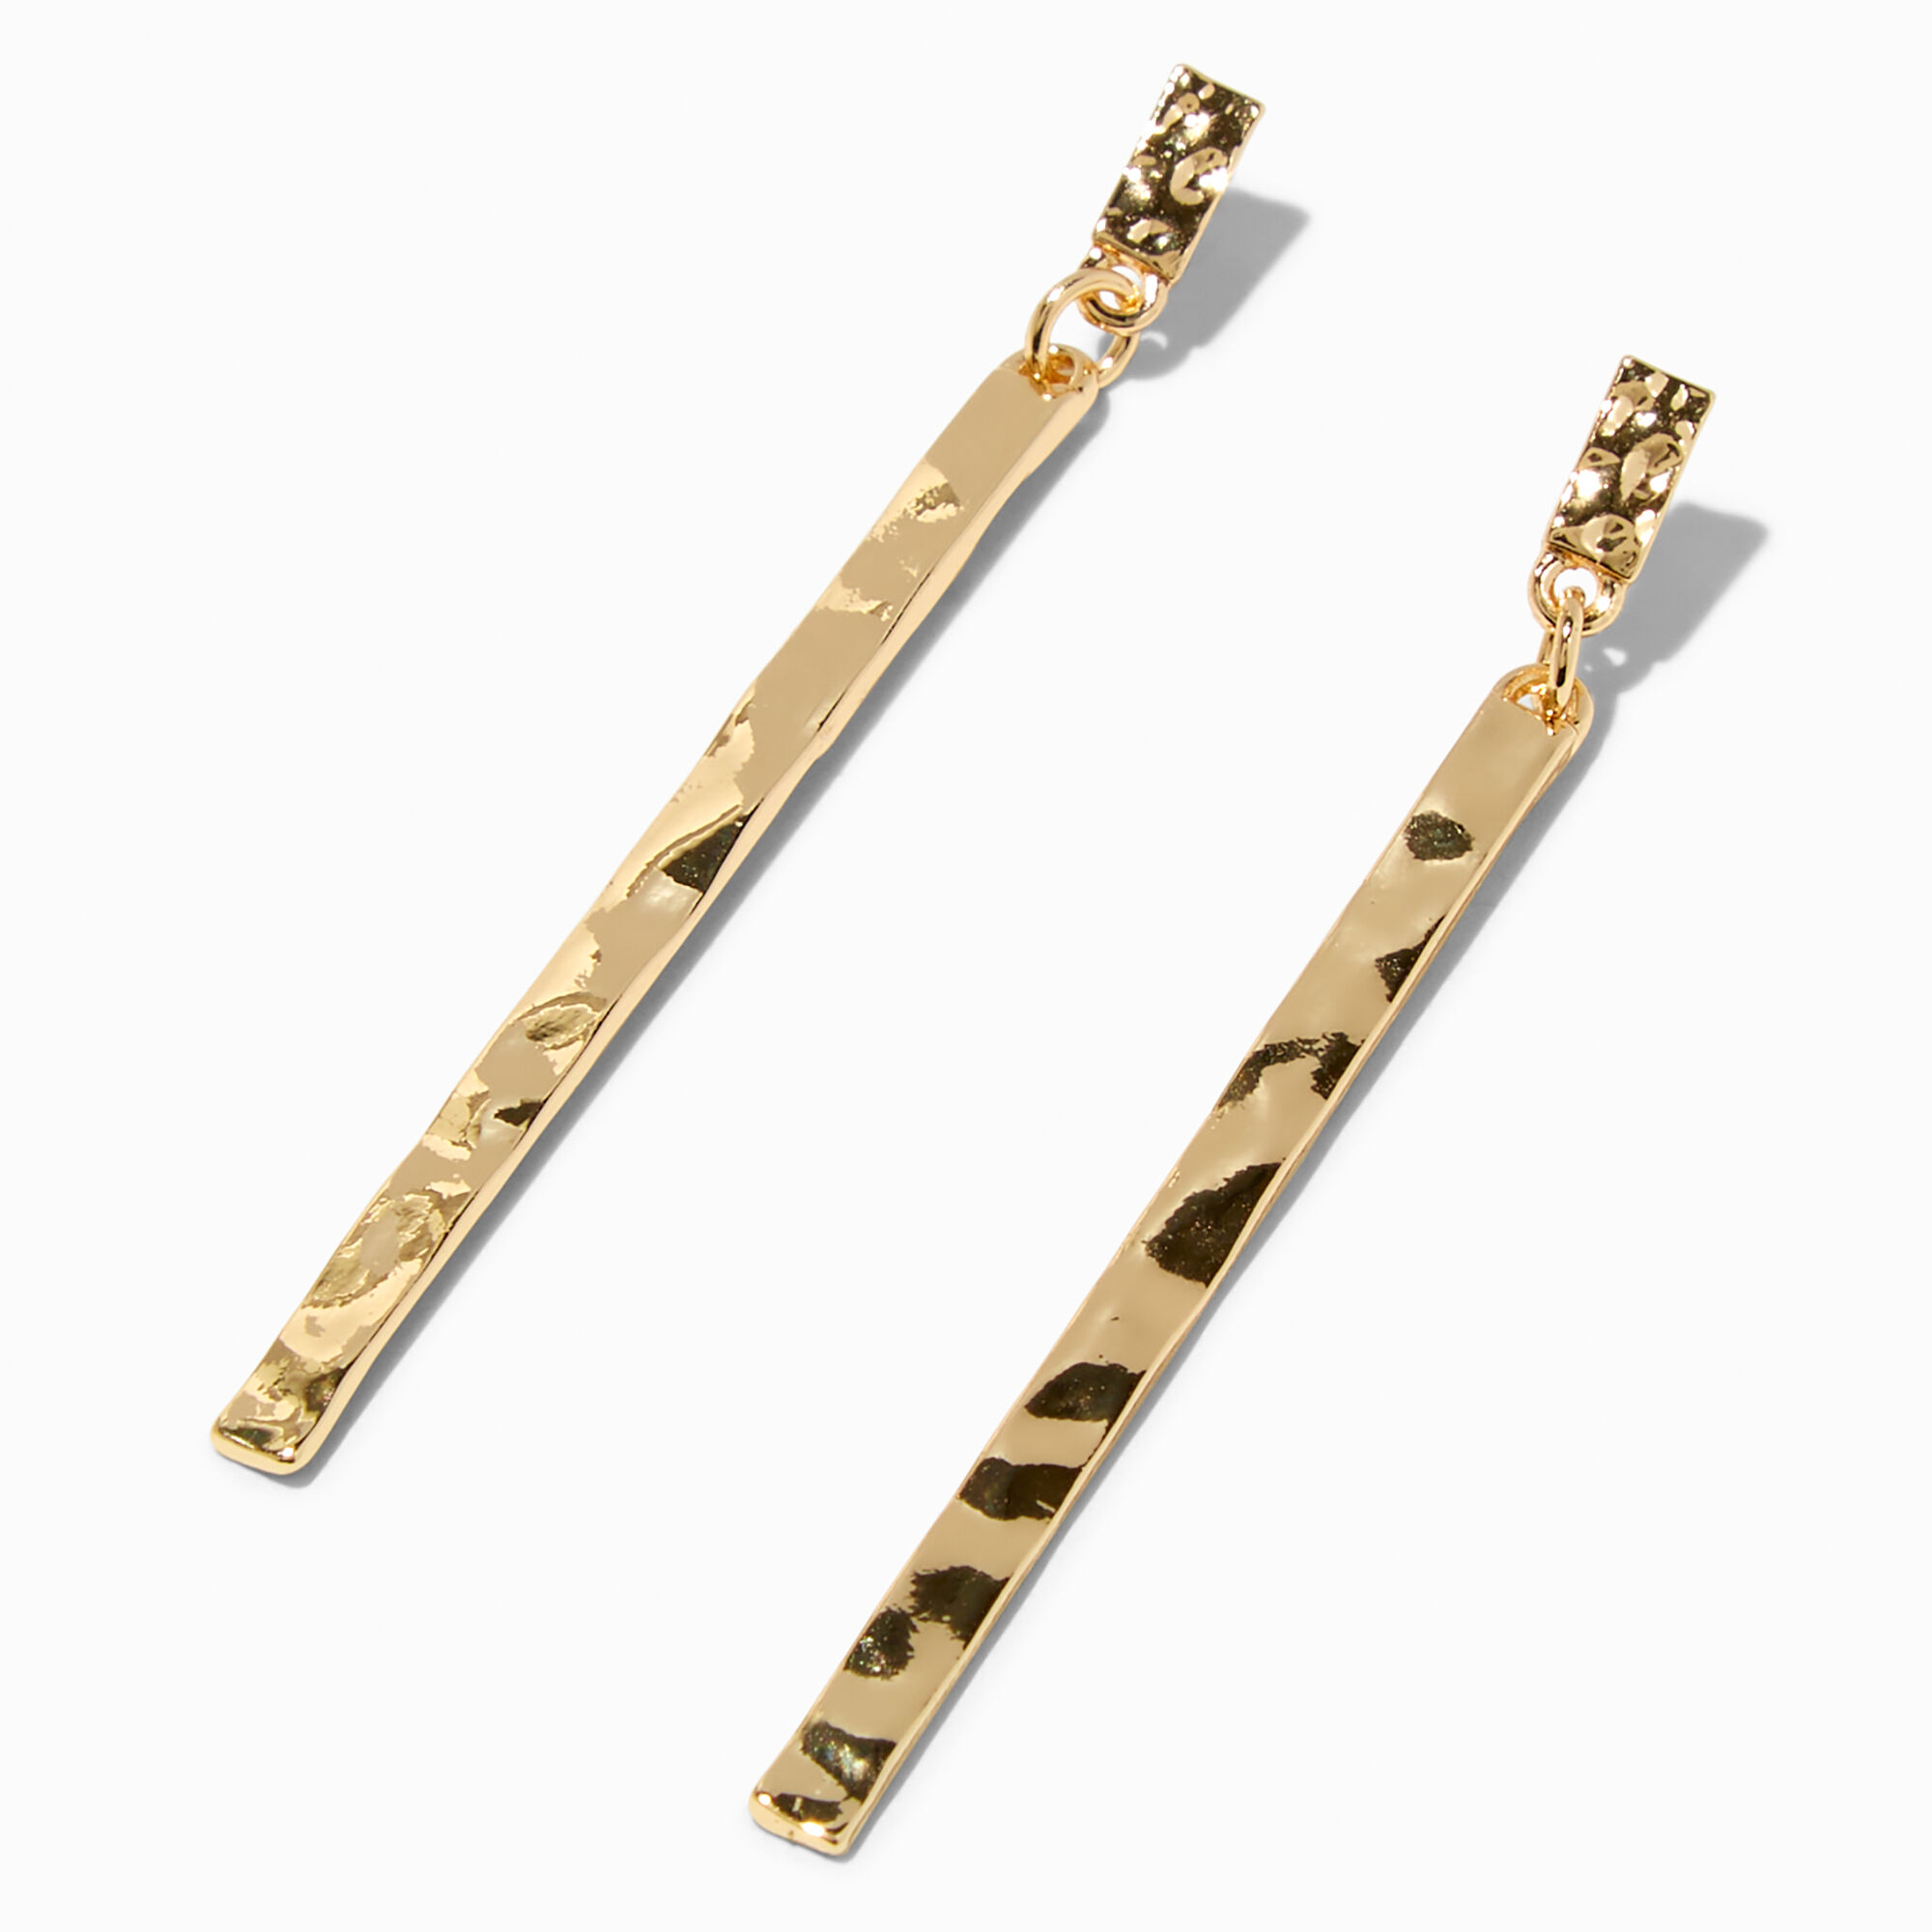 View Claires Tone Beaten 3 Linear Stick Drop Earrings Gold information